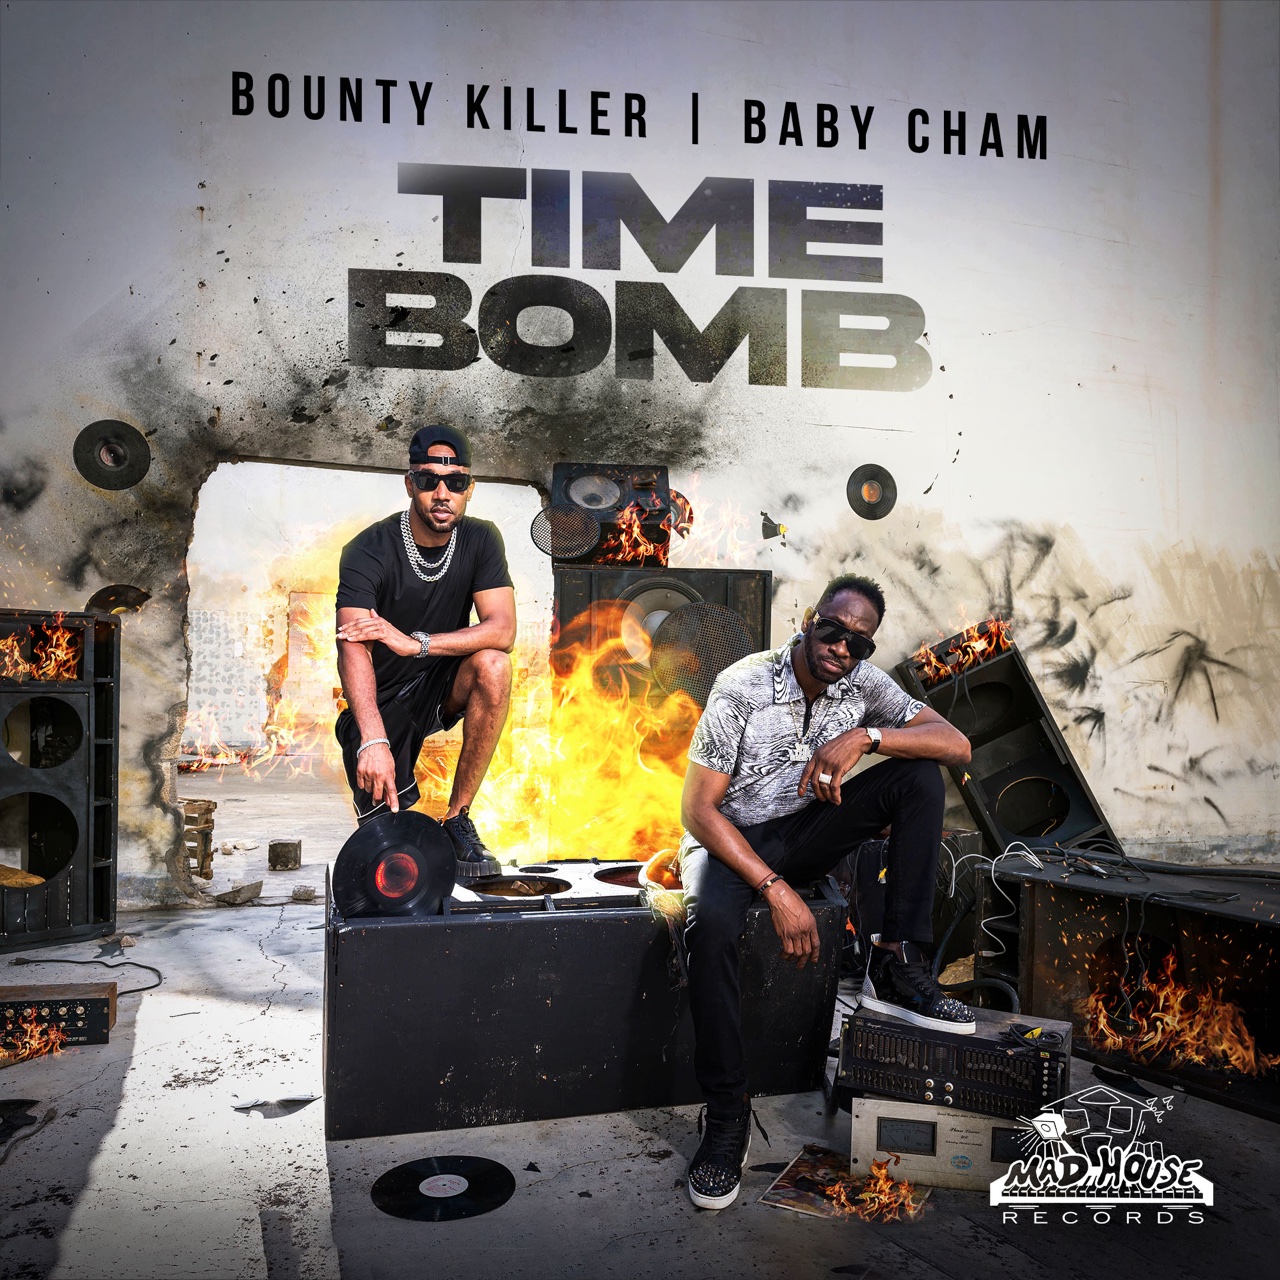 Image of the Time Bomb cover